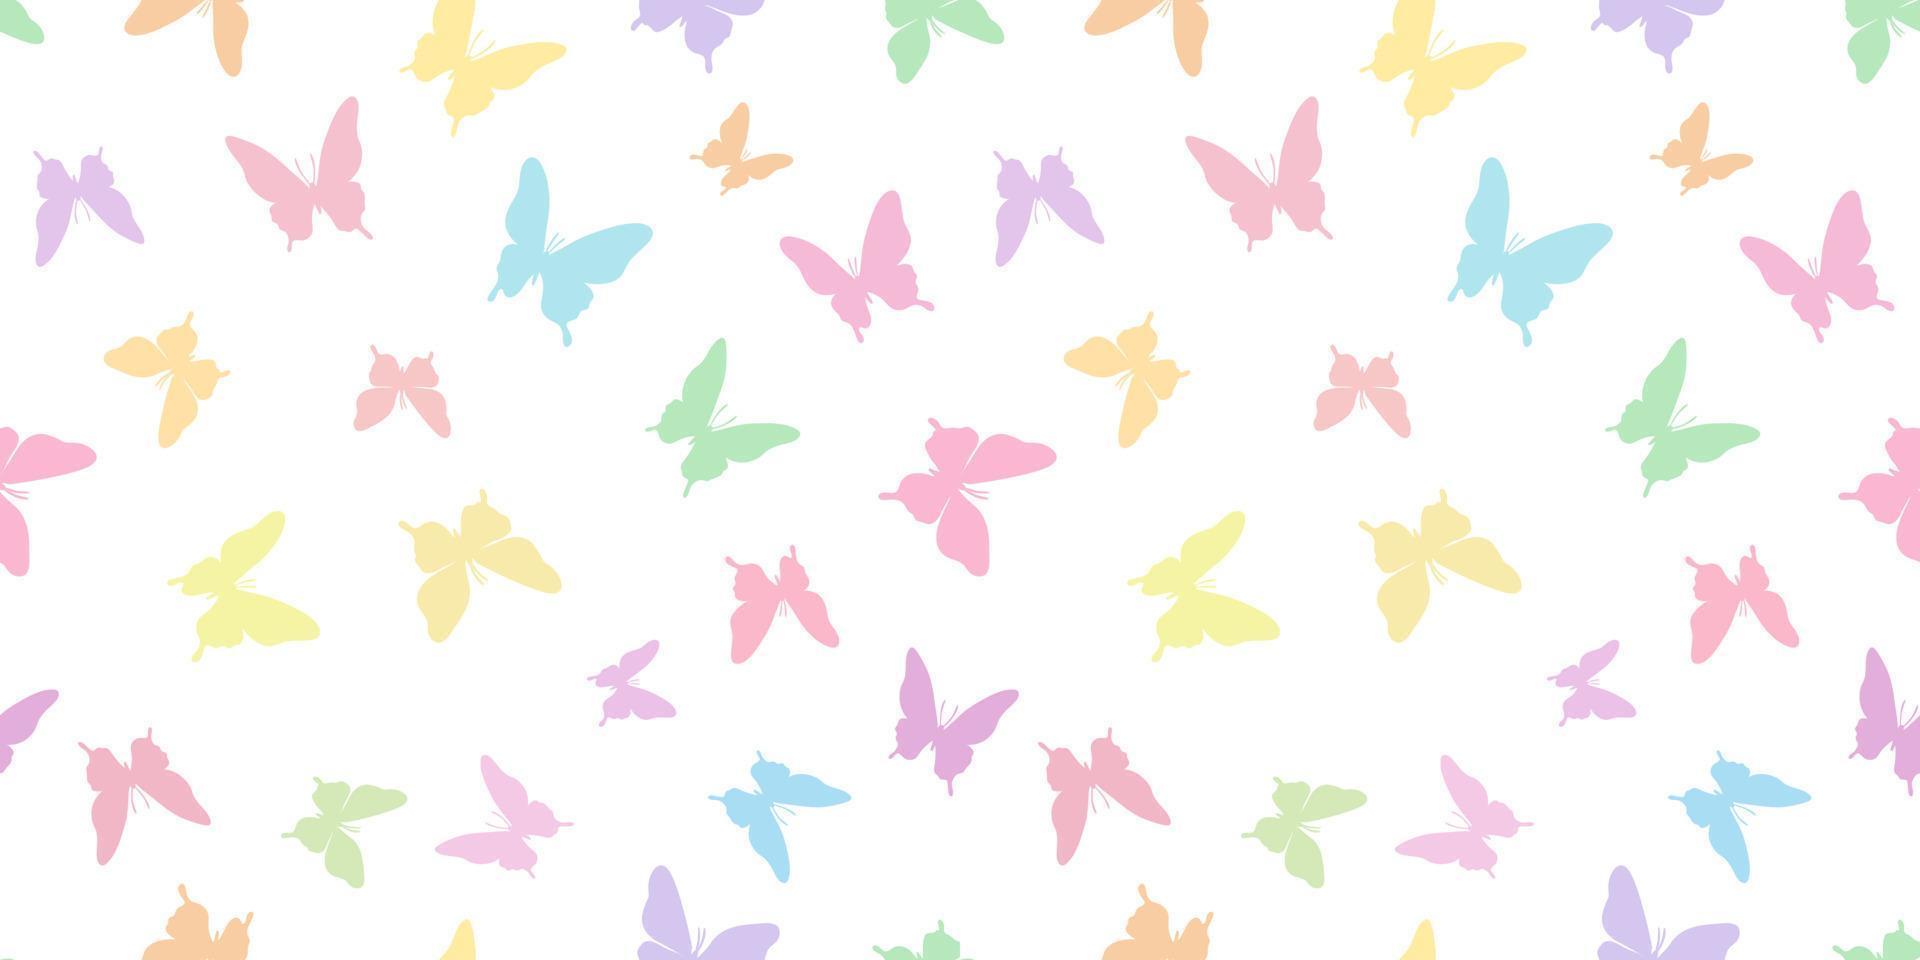 Butterfly vector pattern, repeat tile